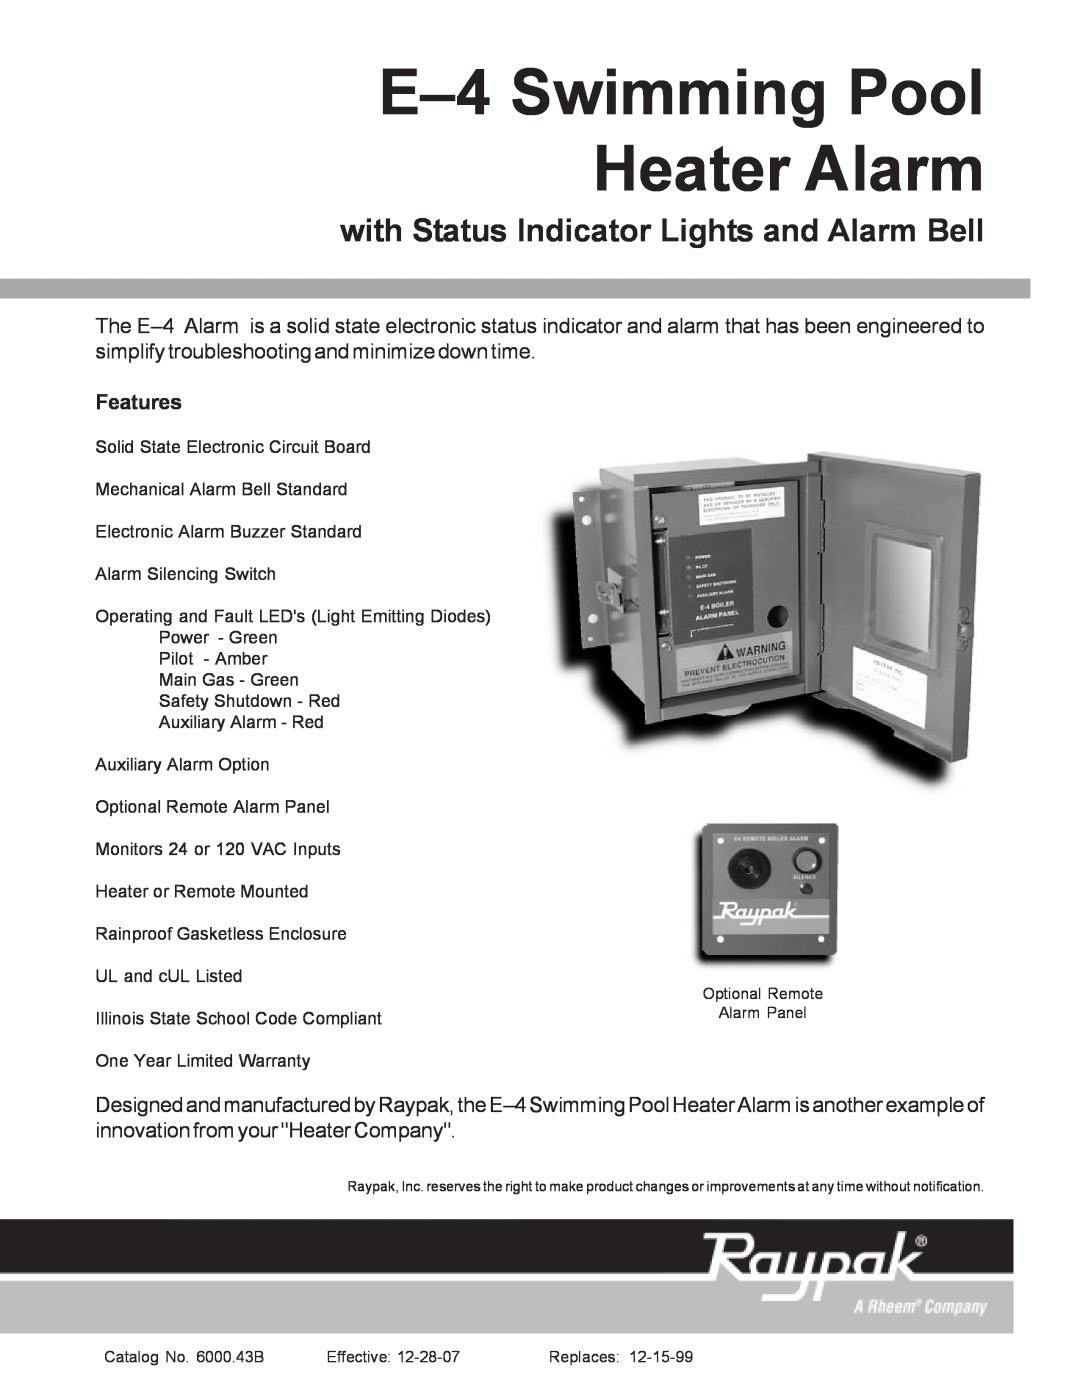 Raypak warranty Features, E-4Swimming Pool Heater Alarm, with Status Indicator Lights and Alarm Bell 